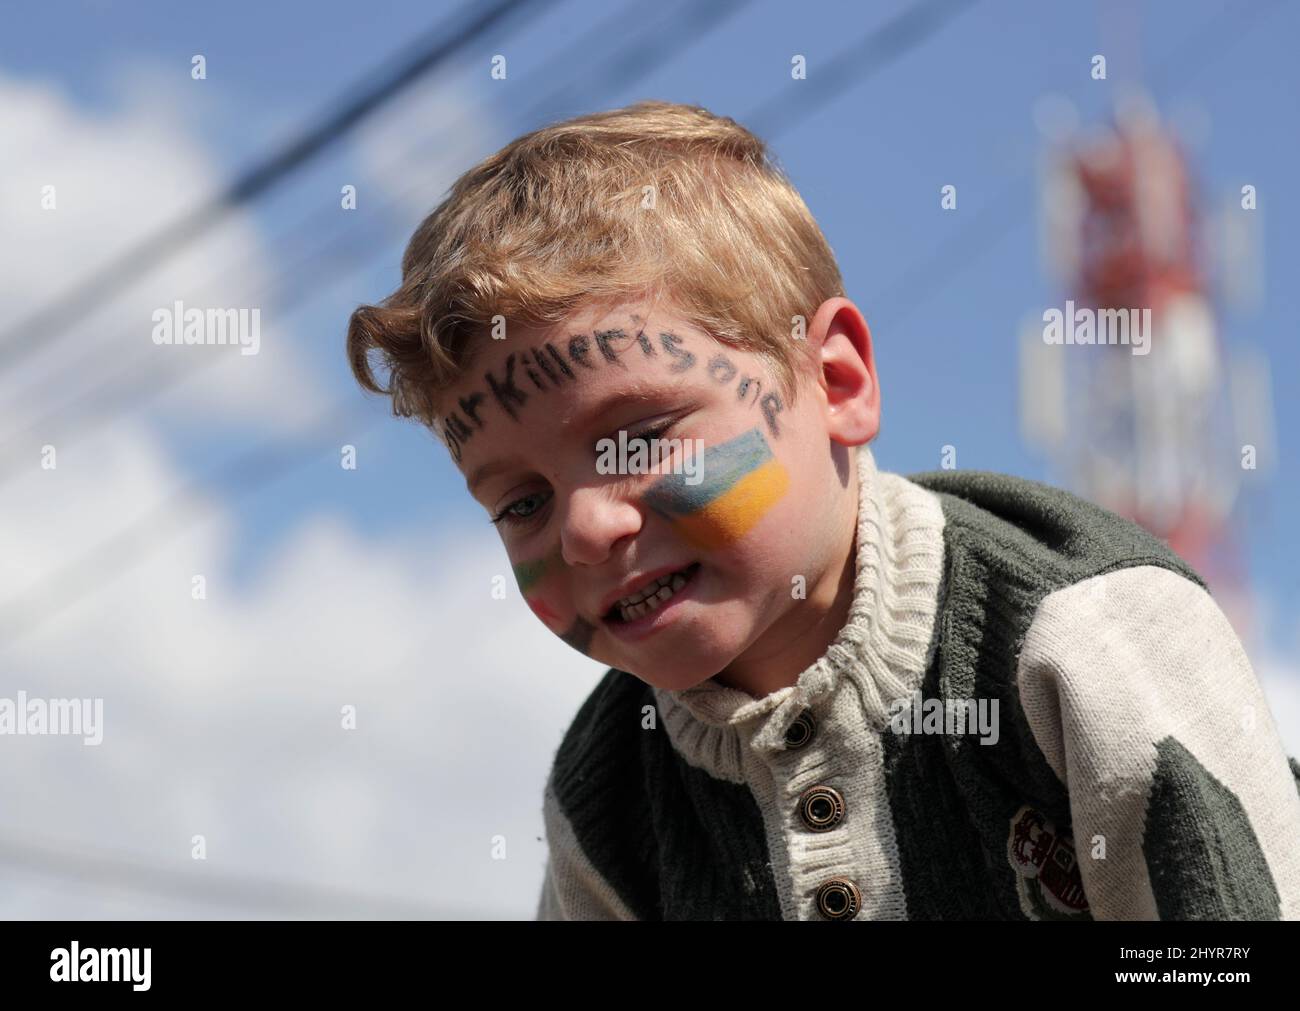 A boy with his face painted in colours of Ukrainian flag takes part in a protest marking the 11th anniversary of the start of the Syrian conflict, in the opposition-held Idlib, Syria March 15, 2022. REUTERS/Khalil Ashawi Stock Photo